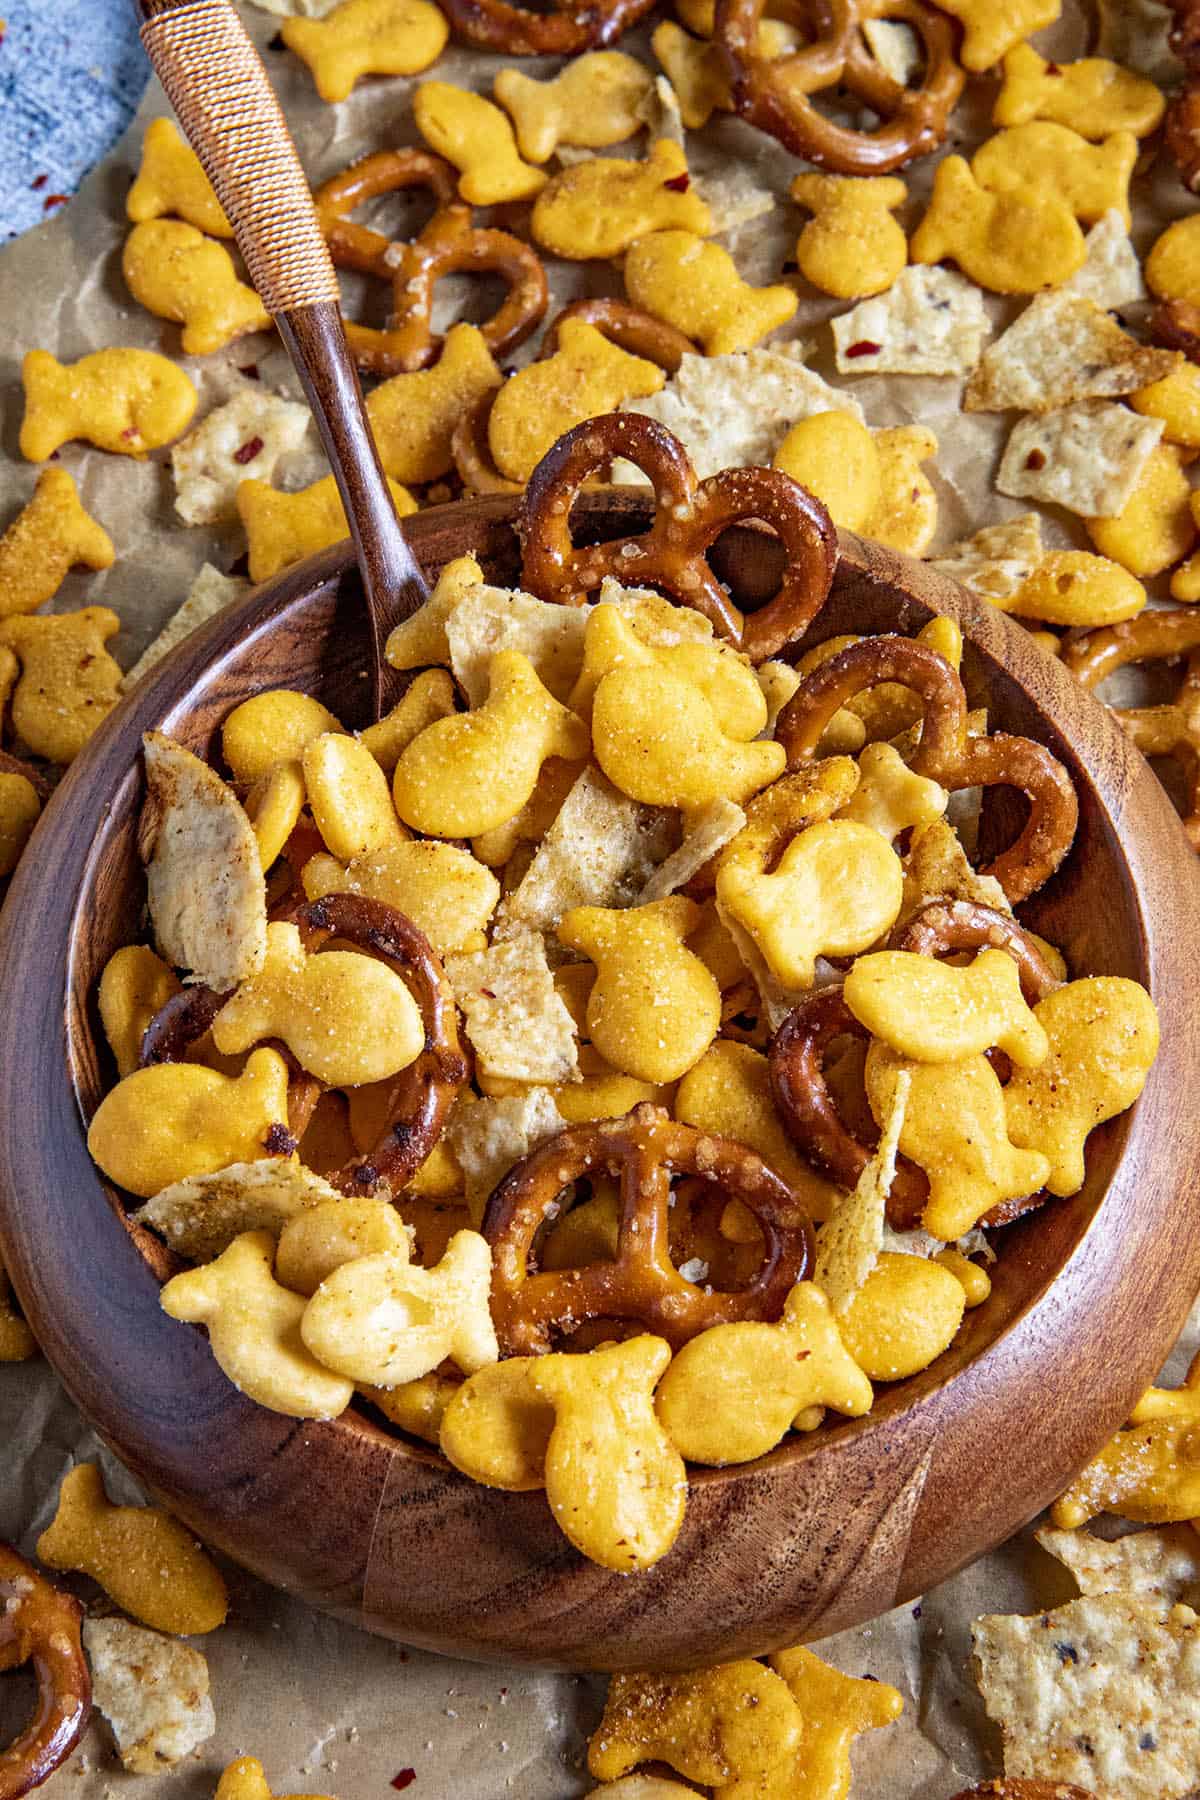 Homemade Spicy Snack Mix looking good.